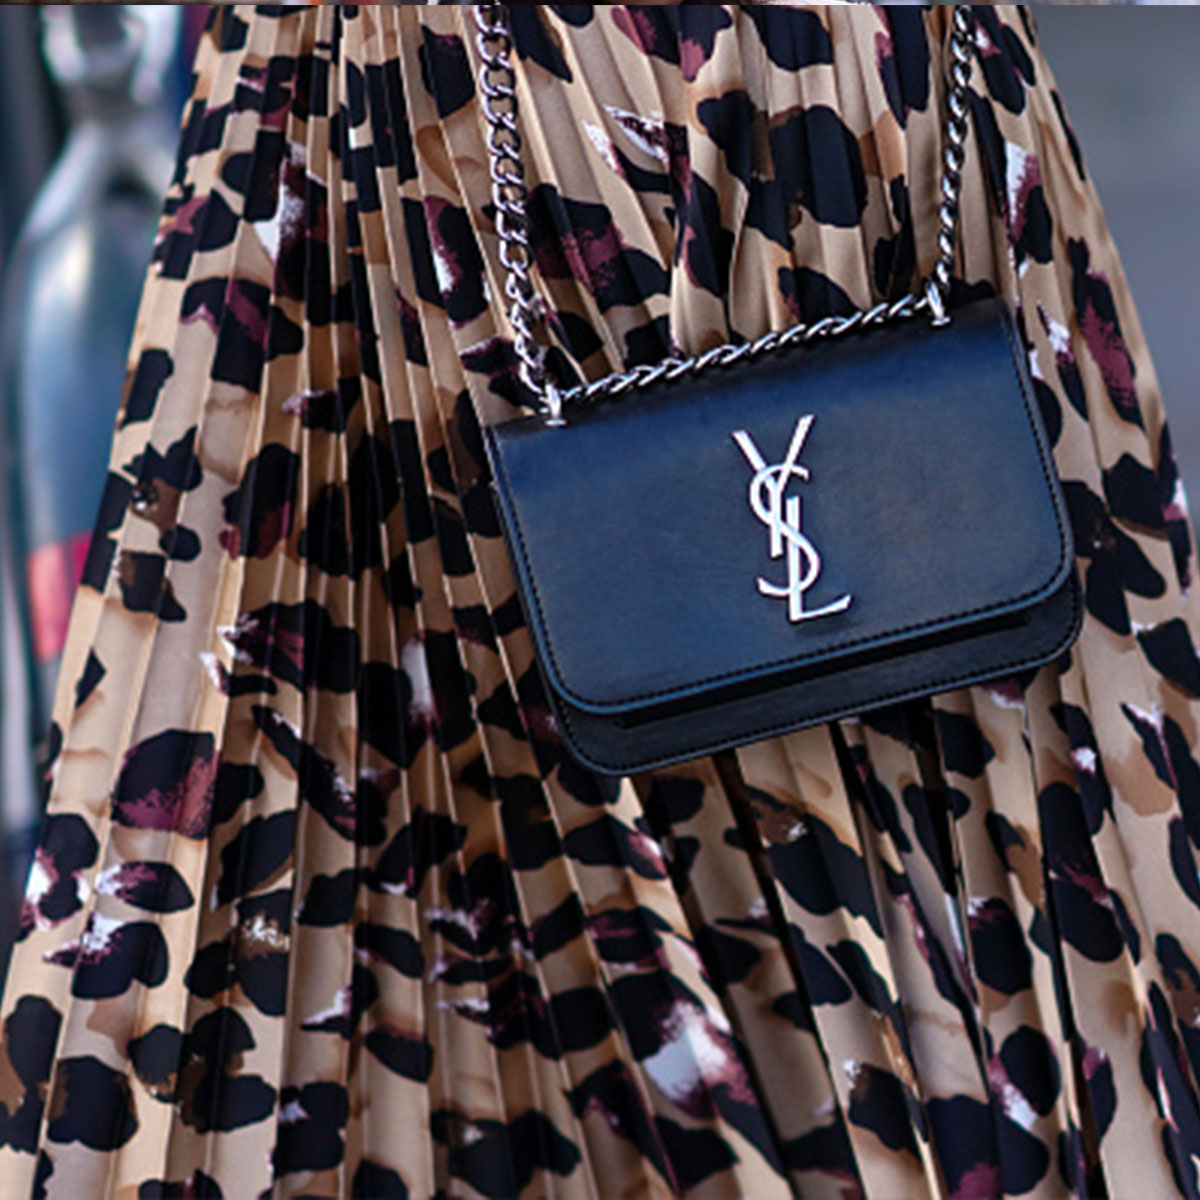 How To Spot A REAL YSL Bag | RealStyle